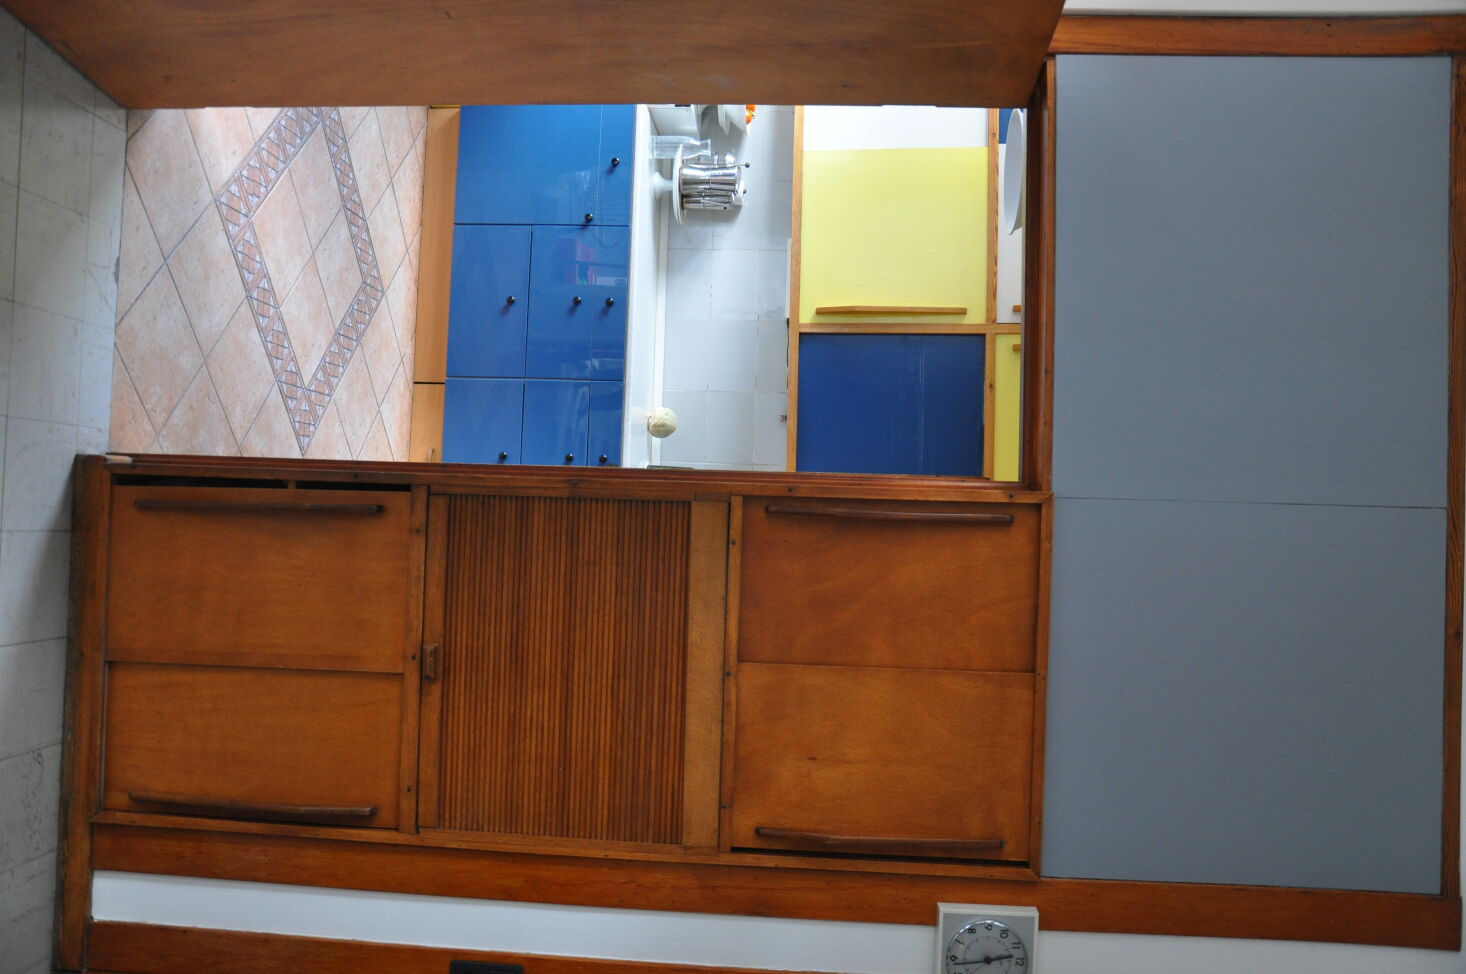 a glimpse at the existing lower cabinets, counter, and floor, all of which were 28